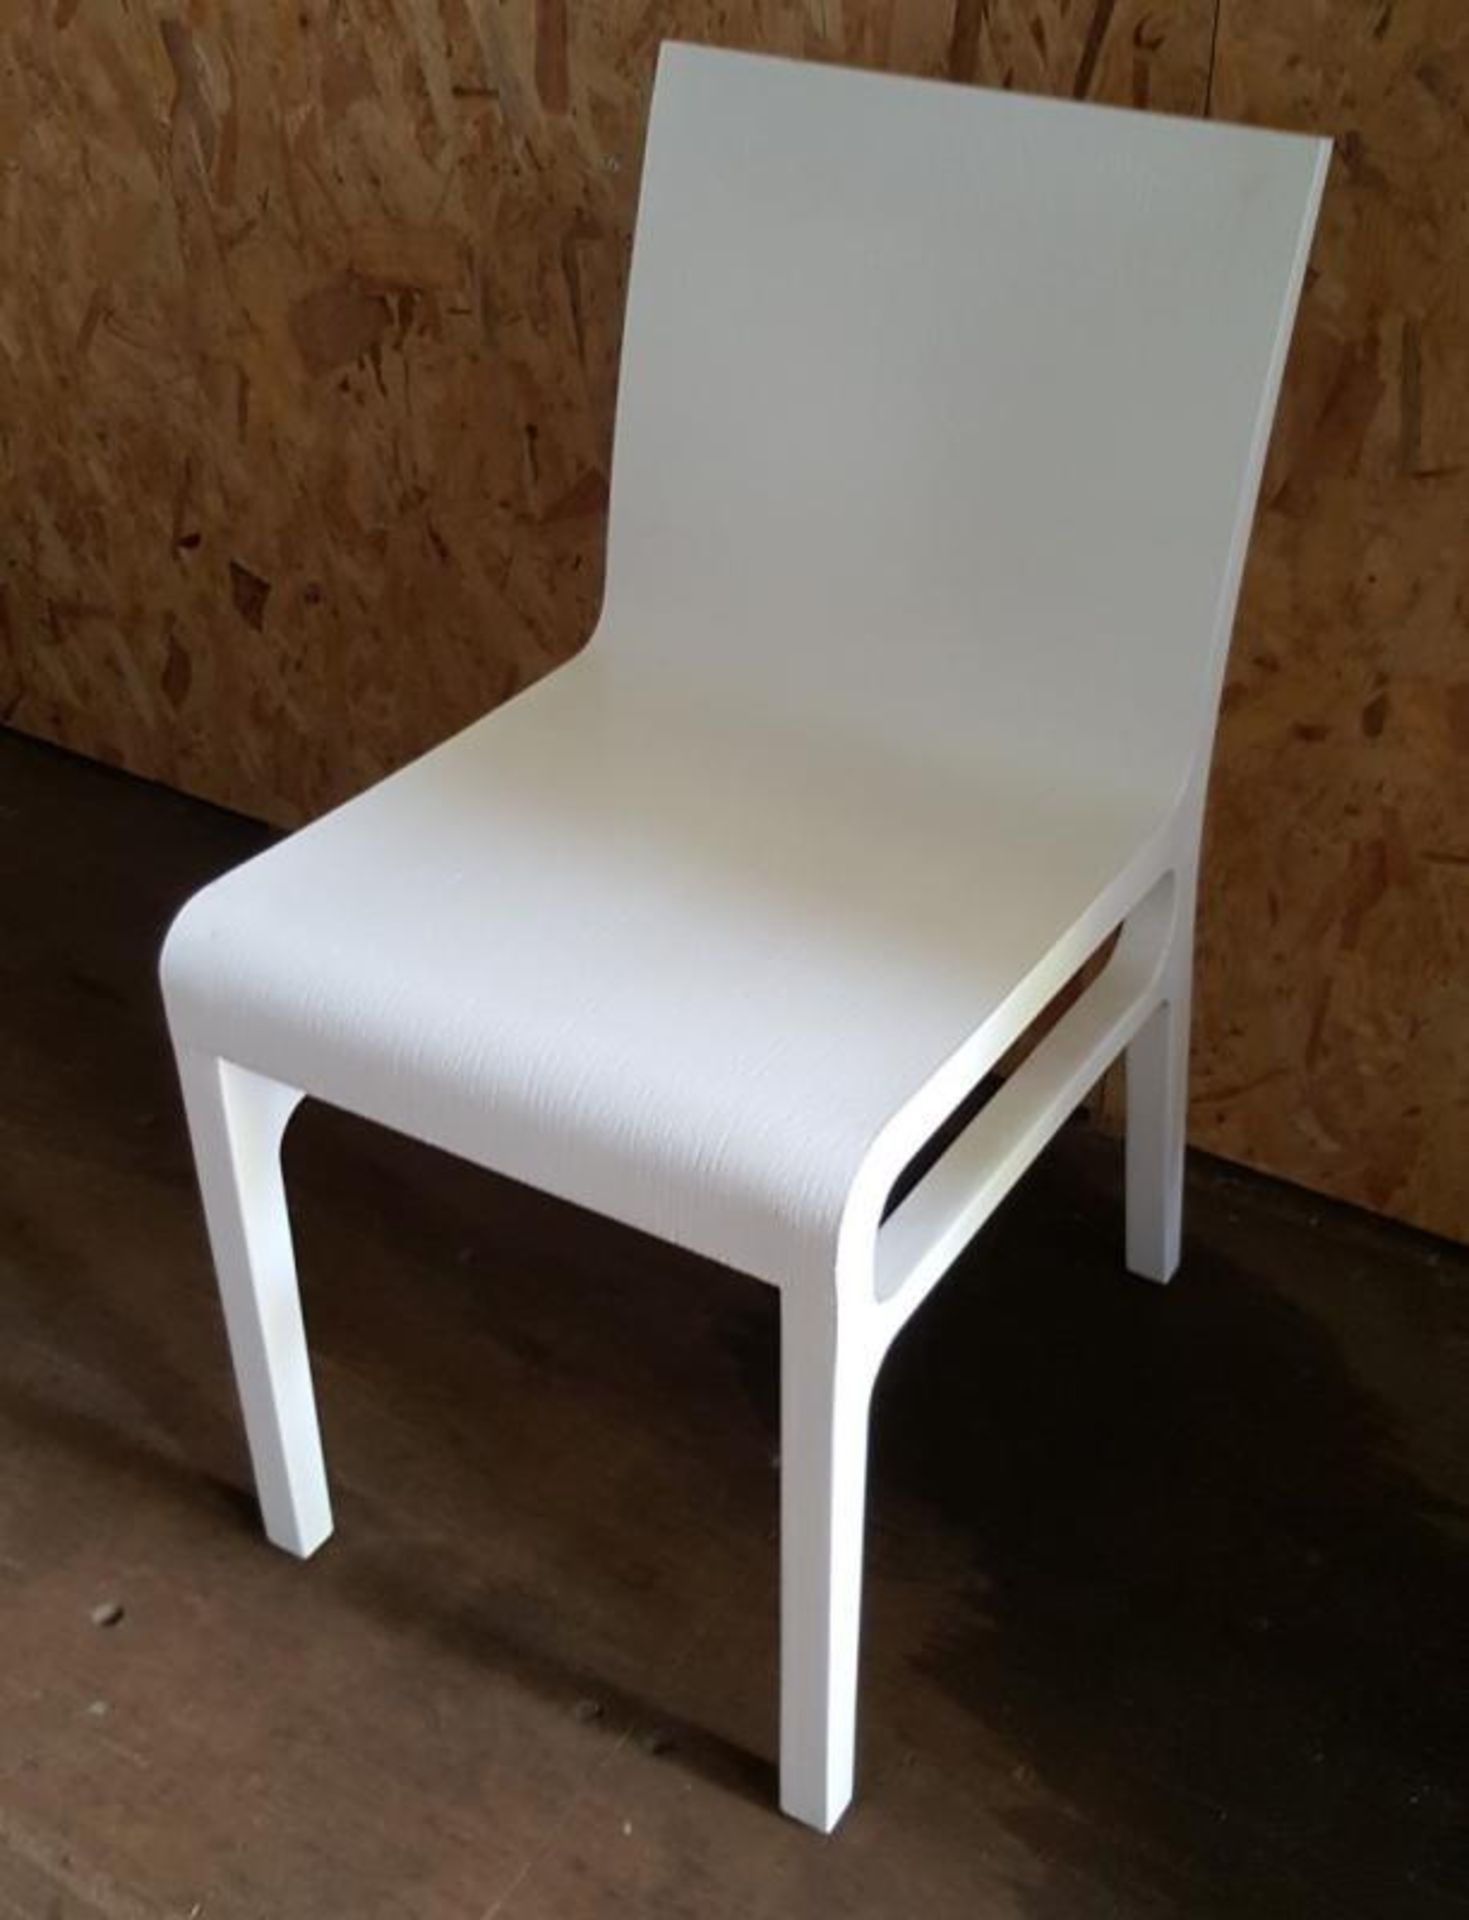 6 x Wooden Dining Chairs Set With A Bright White Finish - Dimensions: Used, In Good Condition - Ref